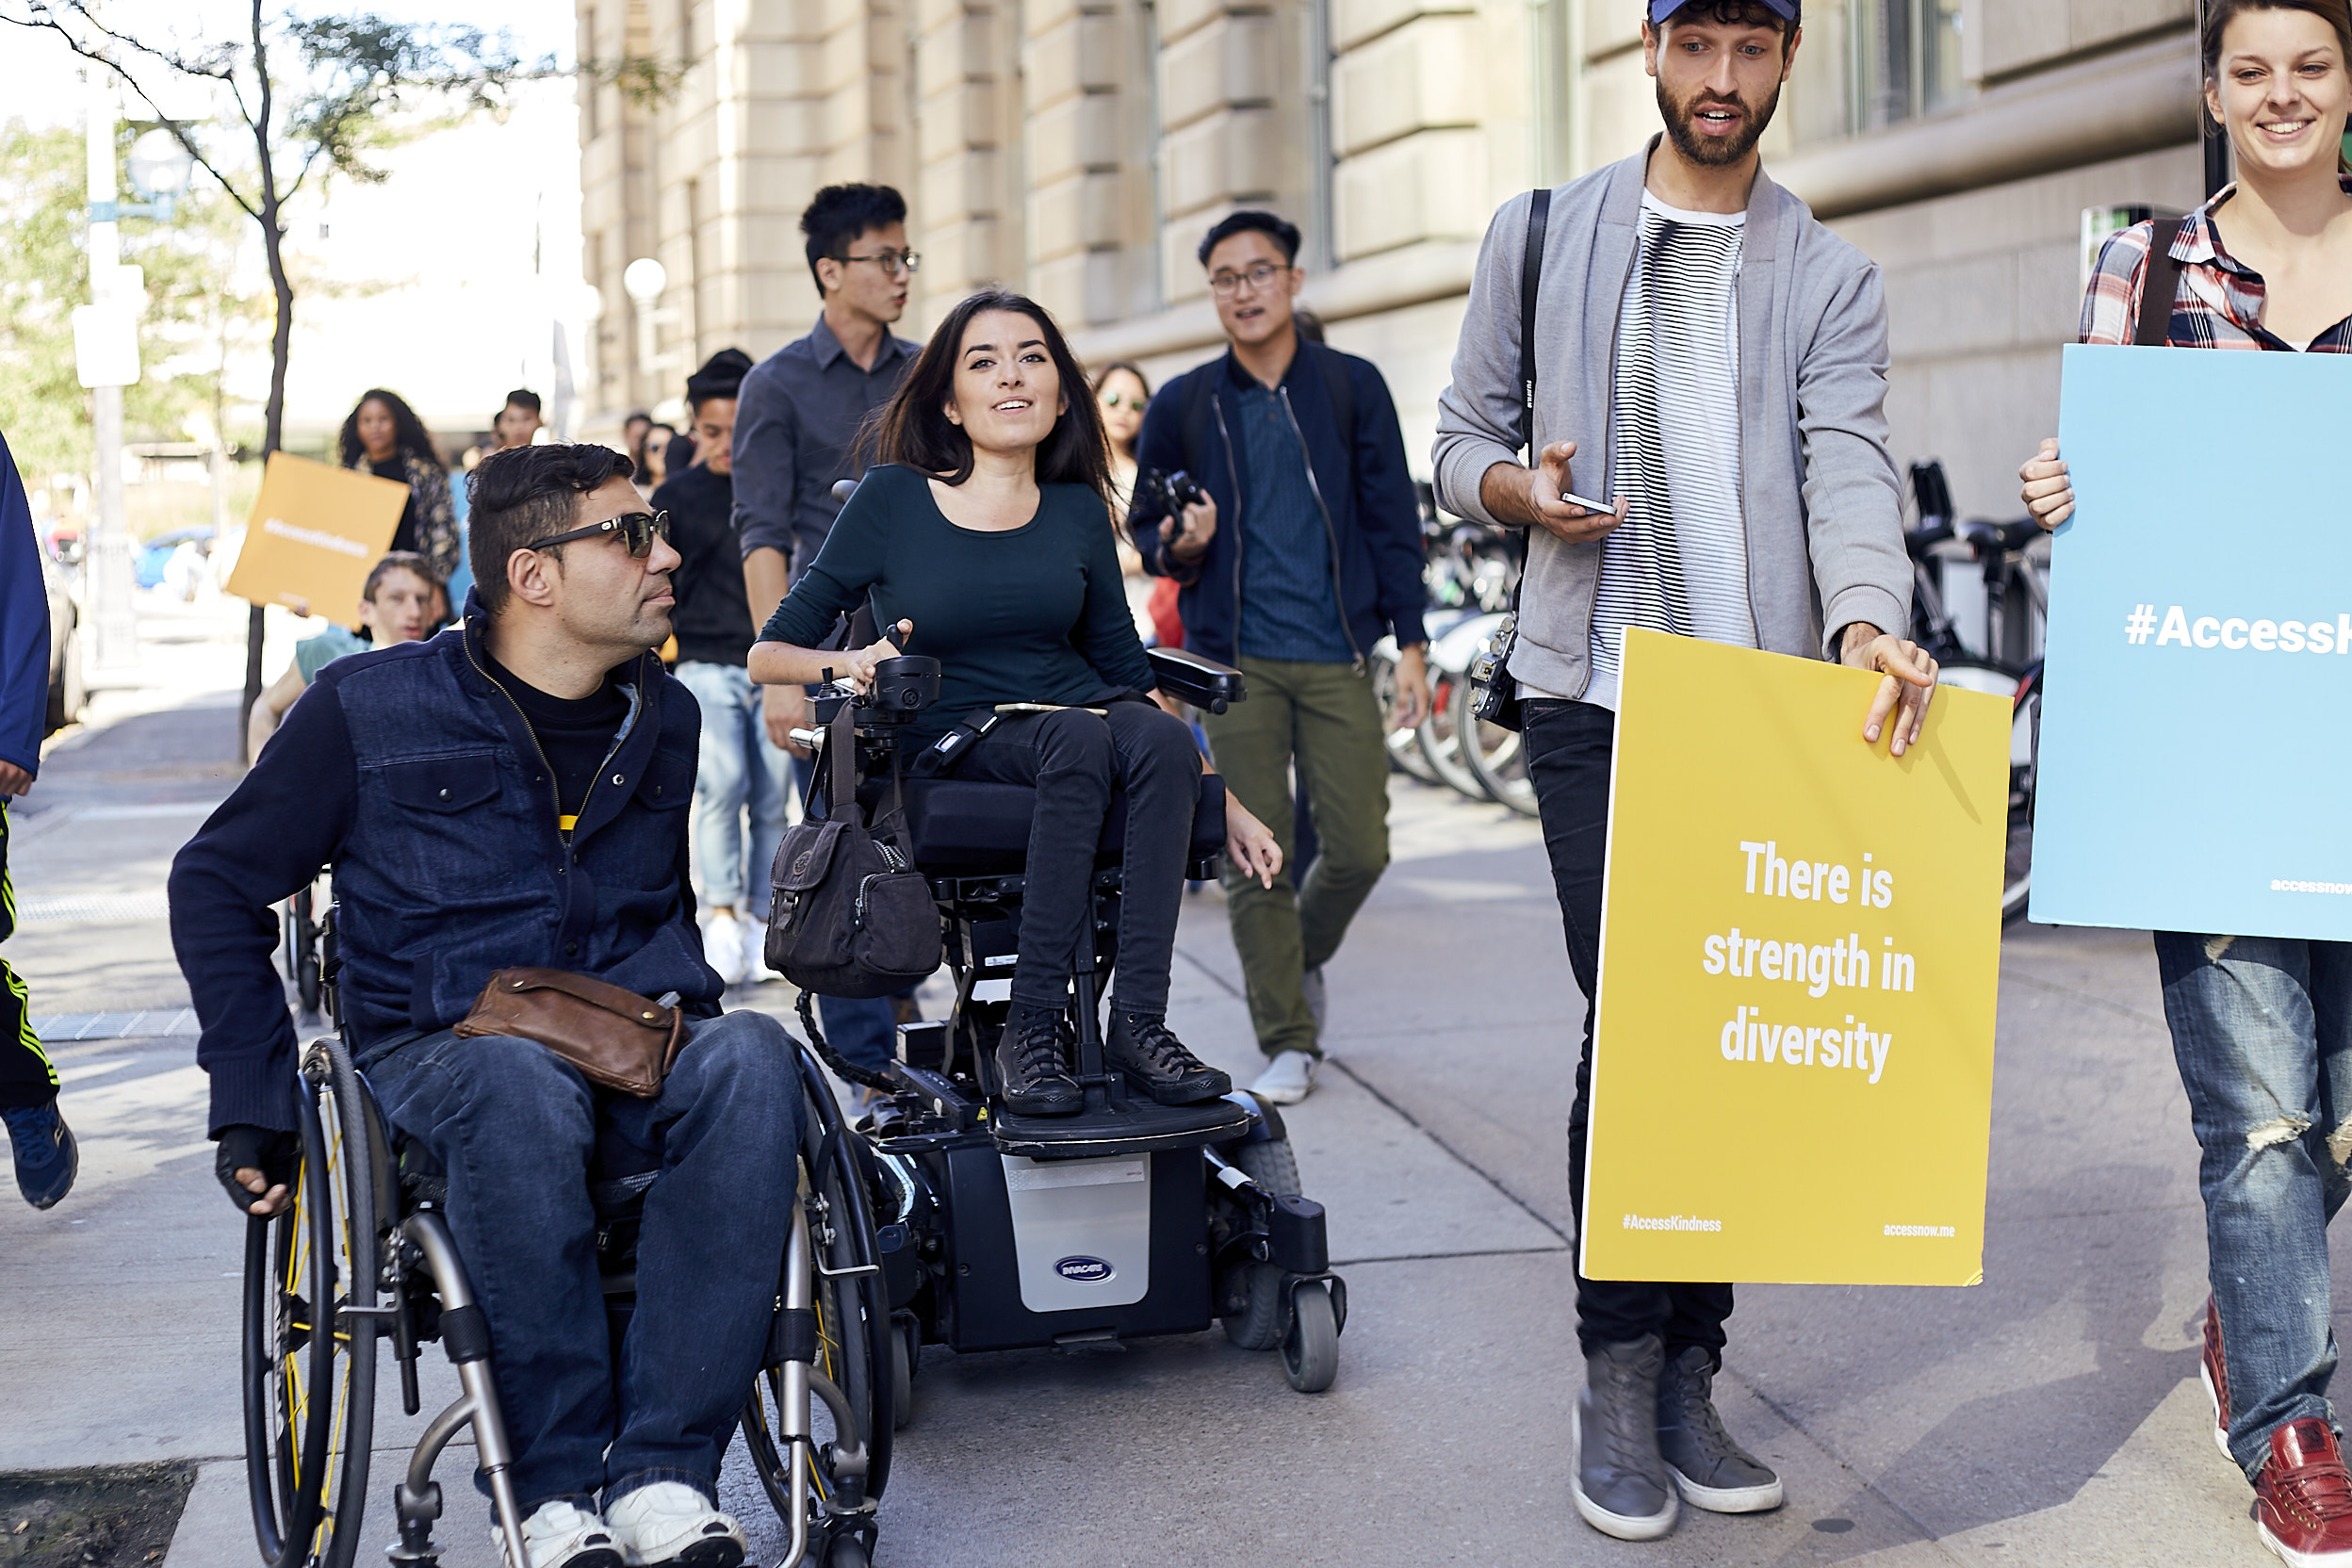 a group of interabled people walk down a city sidewalk, some hold signs that say "you had me at accessible"